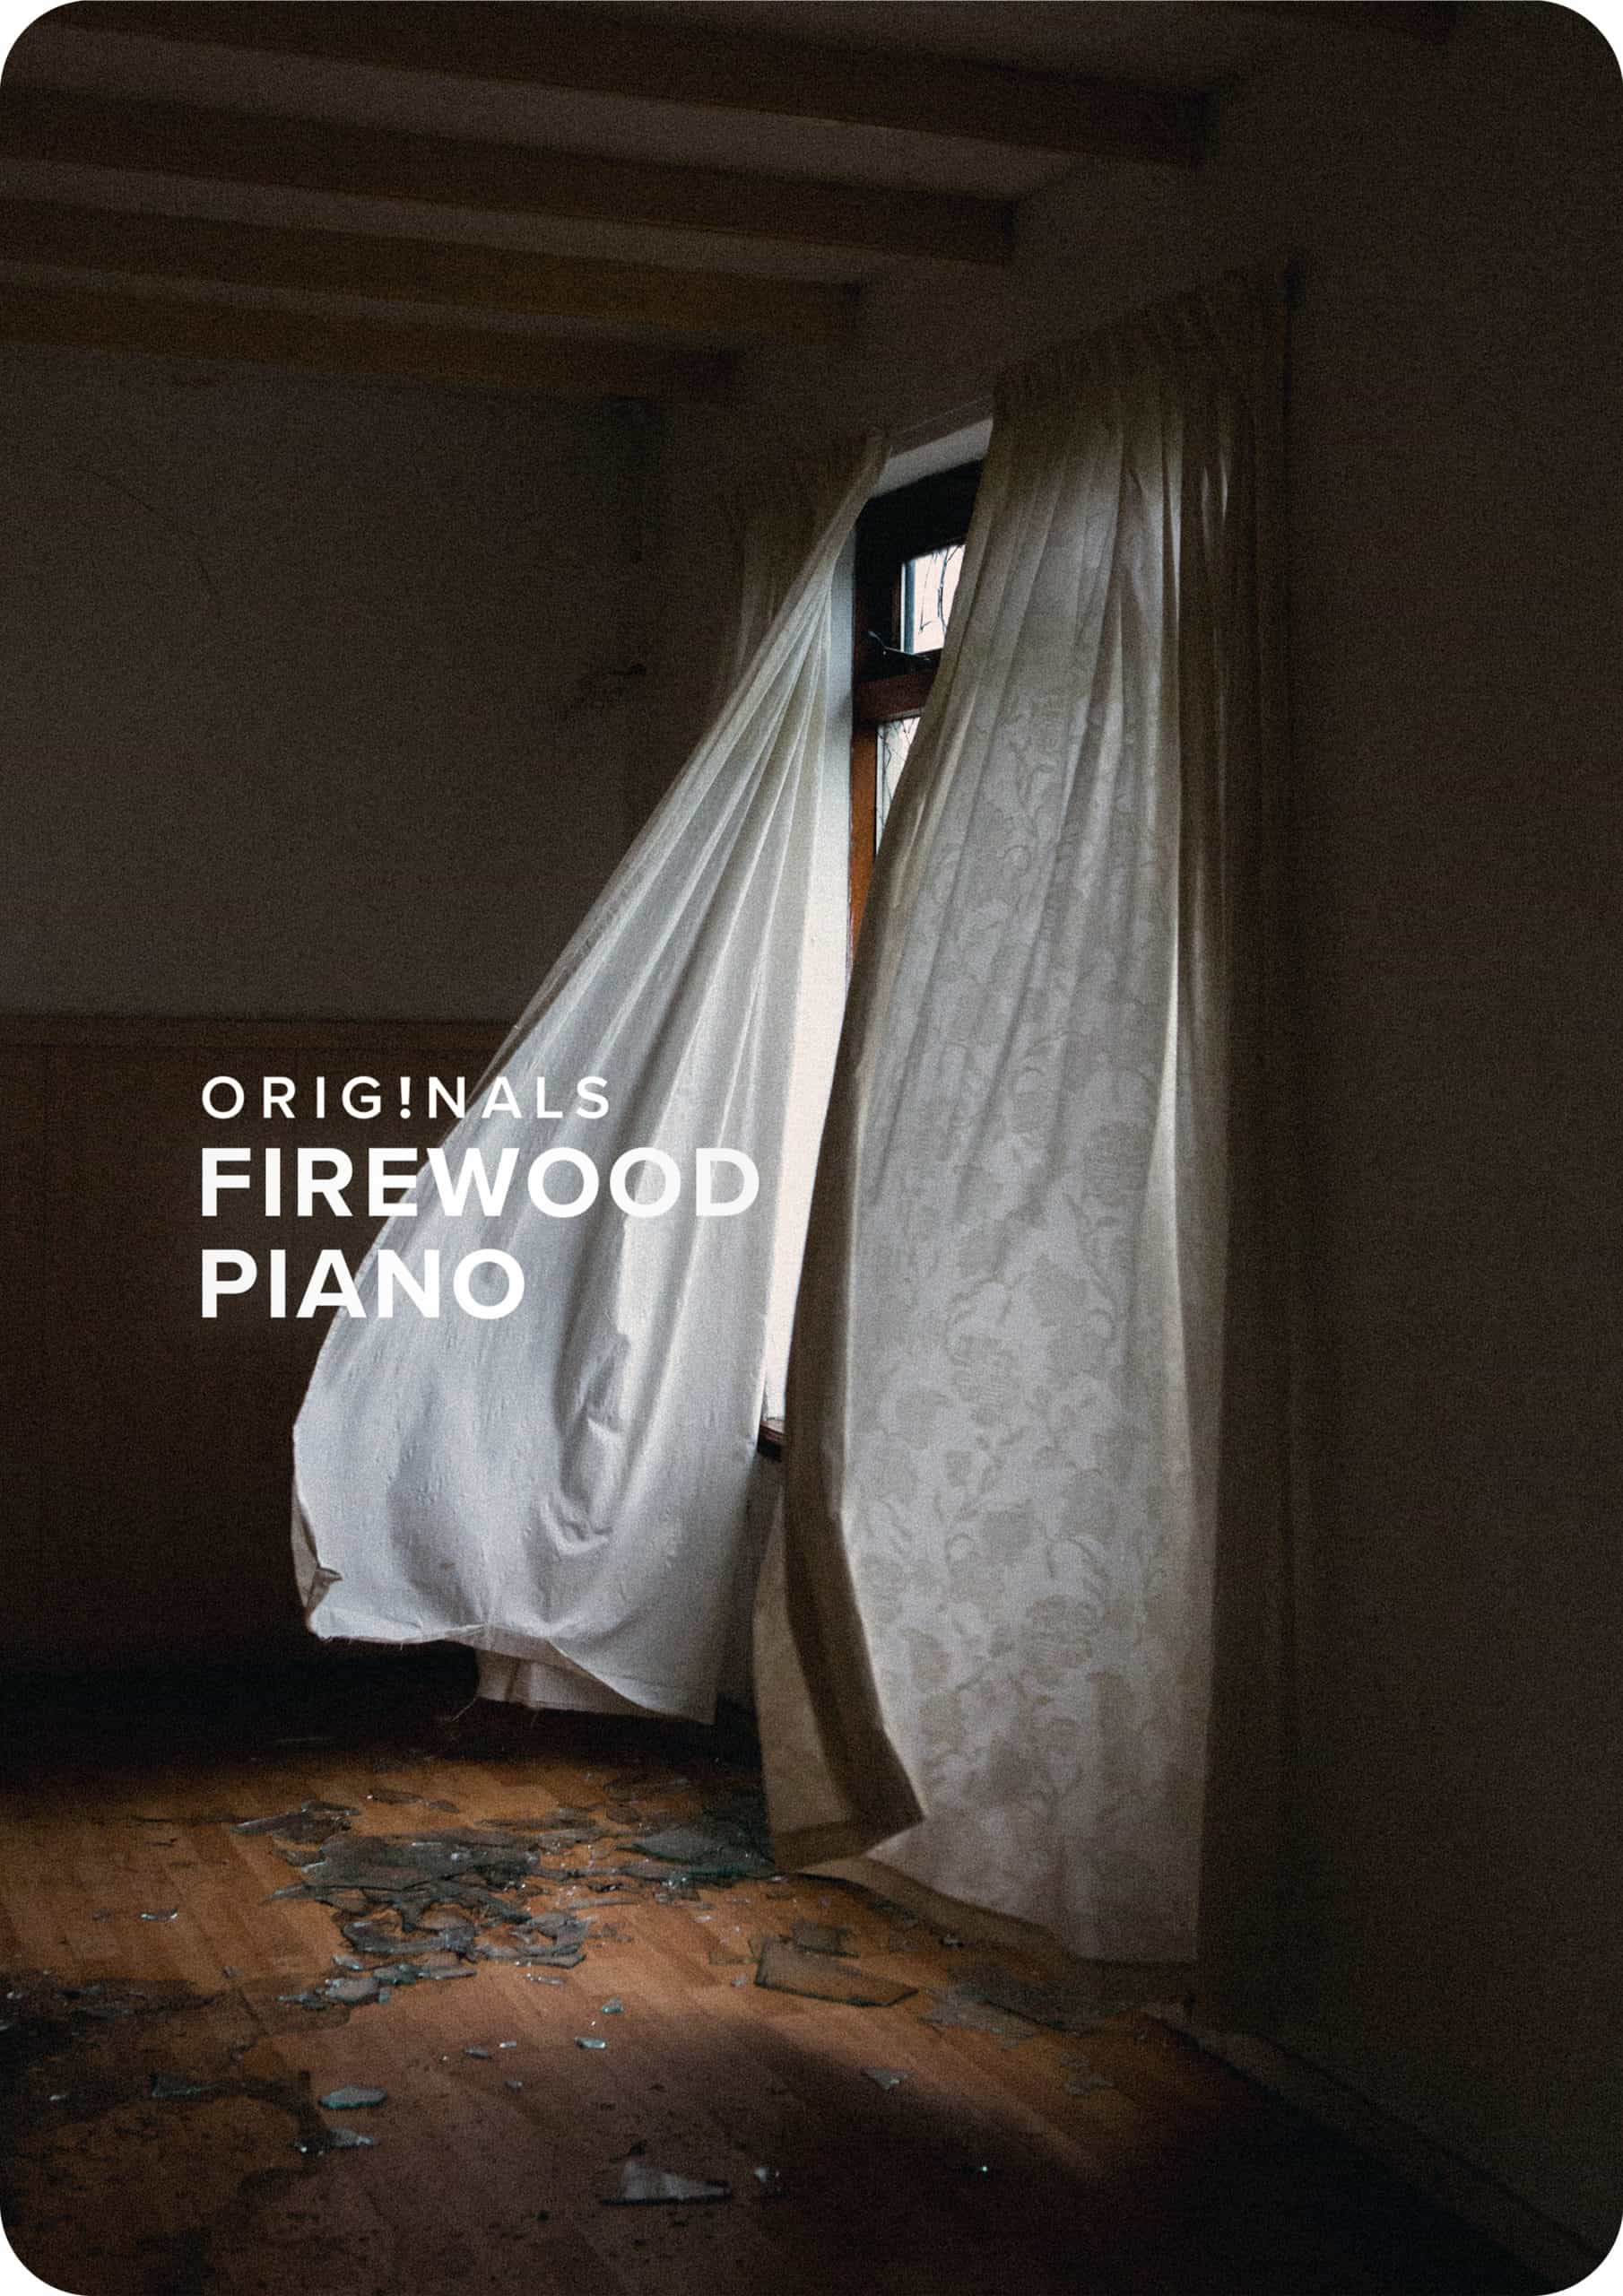 Spitfire Audio’s FIREWOOD PIANO — A Charming Sounding Upright Piano Bursting with Character